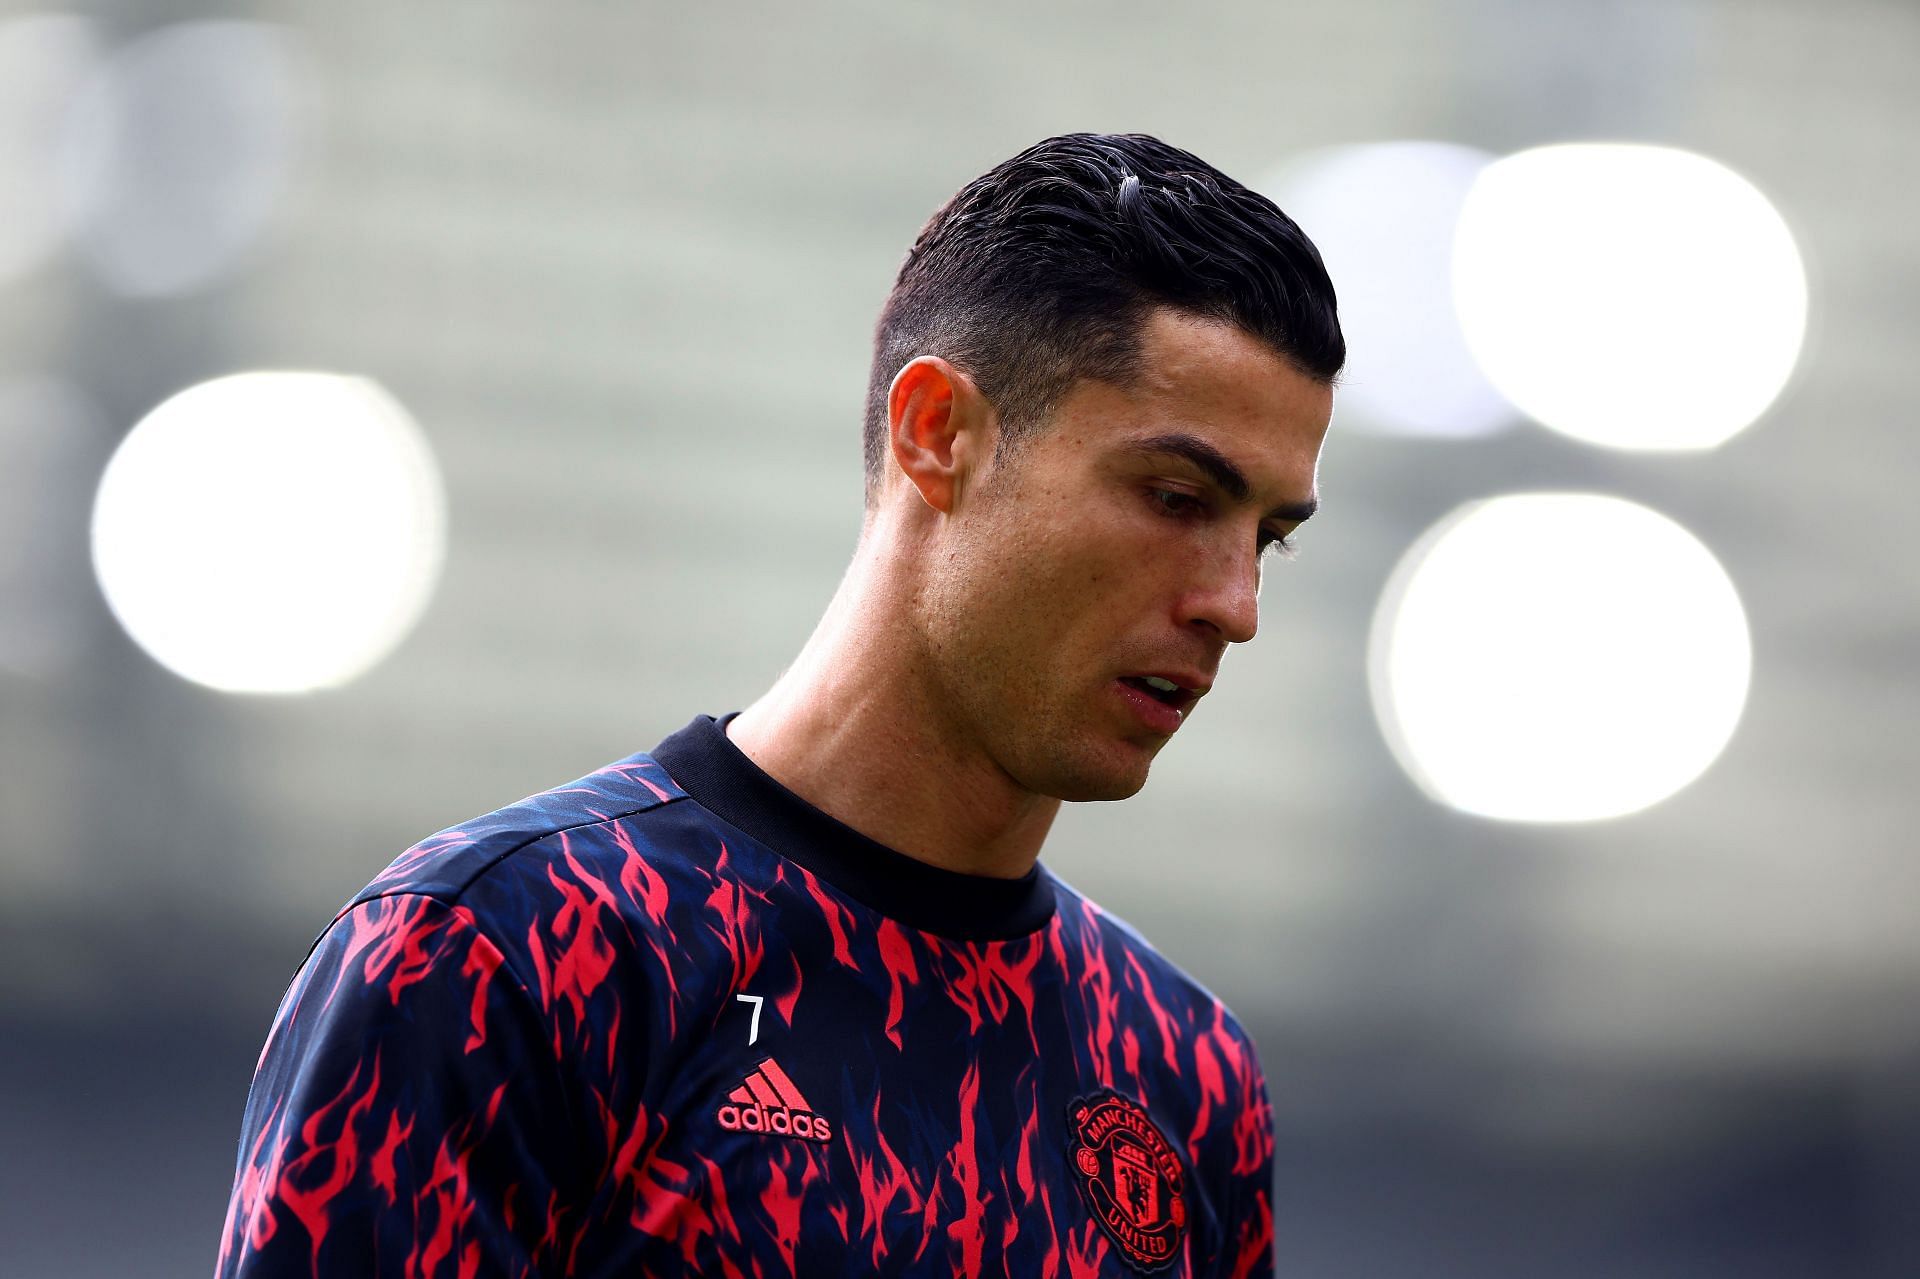 Cristiano Ronaldo is unimpressed by some of the infrastructure at Manchester United